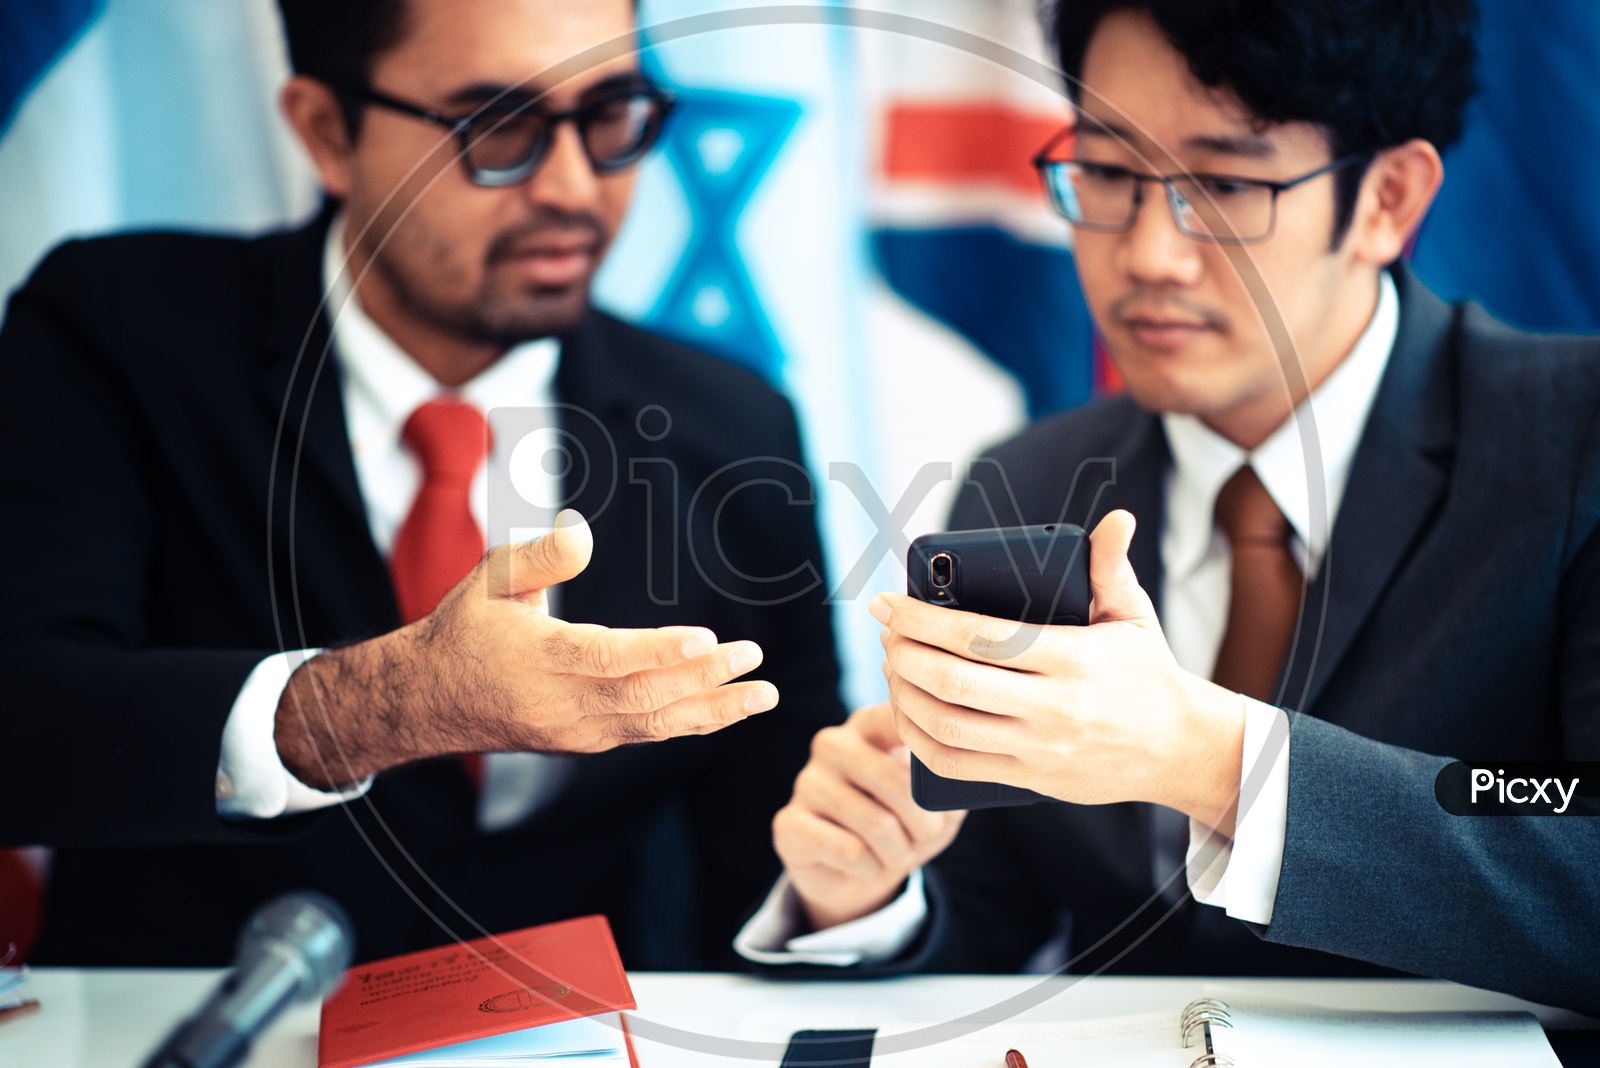 Businessmen using a smartphone during a press conference